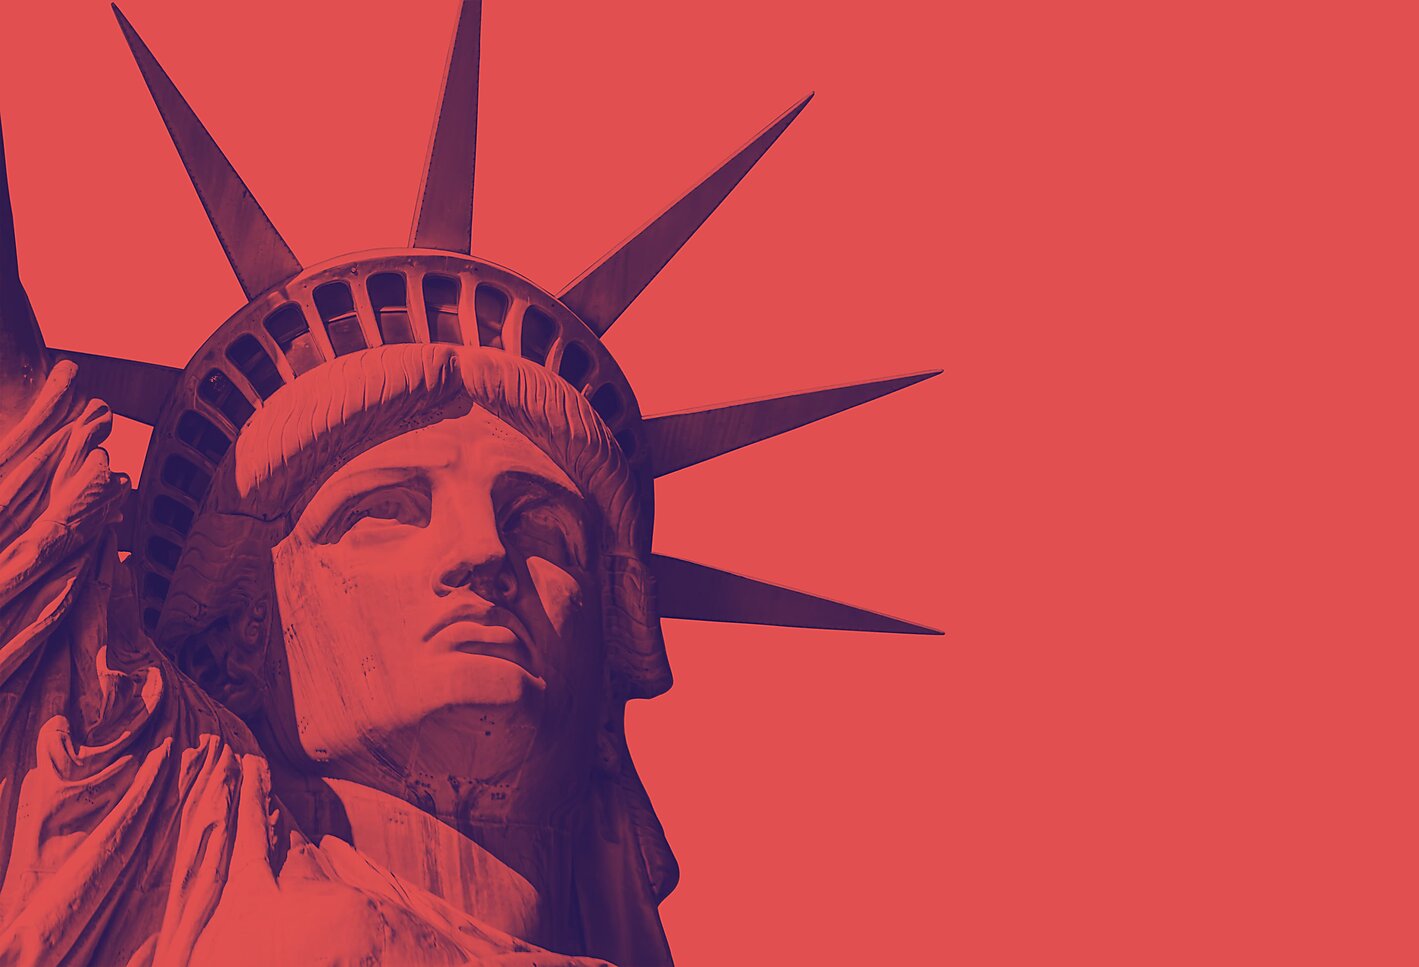 Statue of Liberty with a red overlay